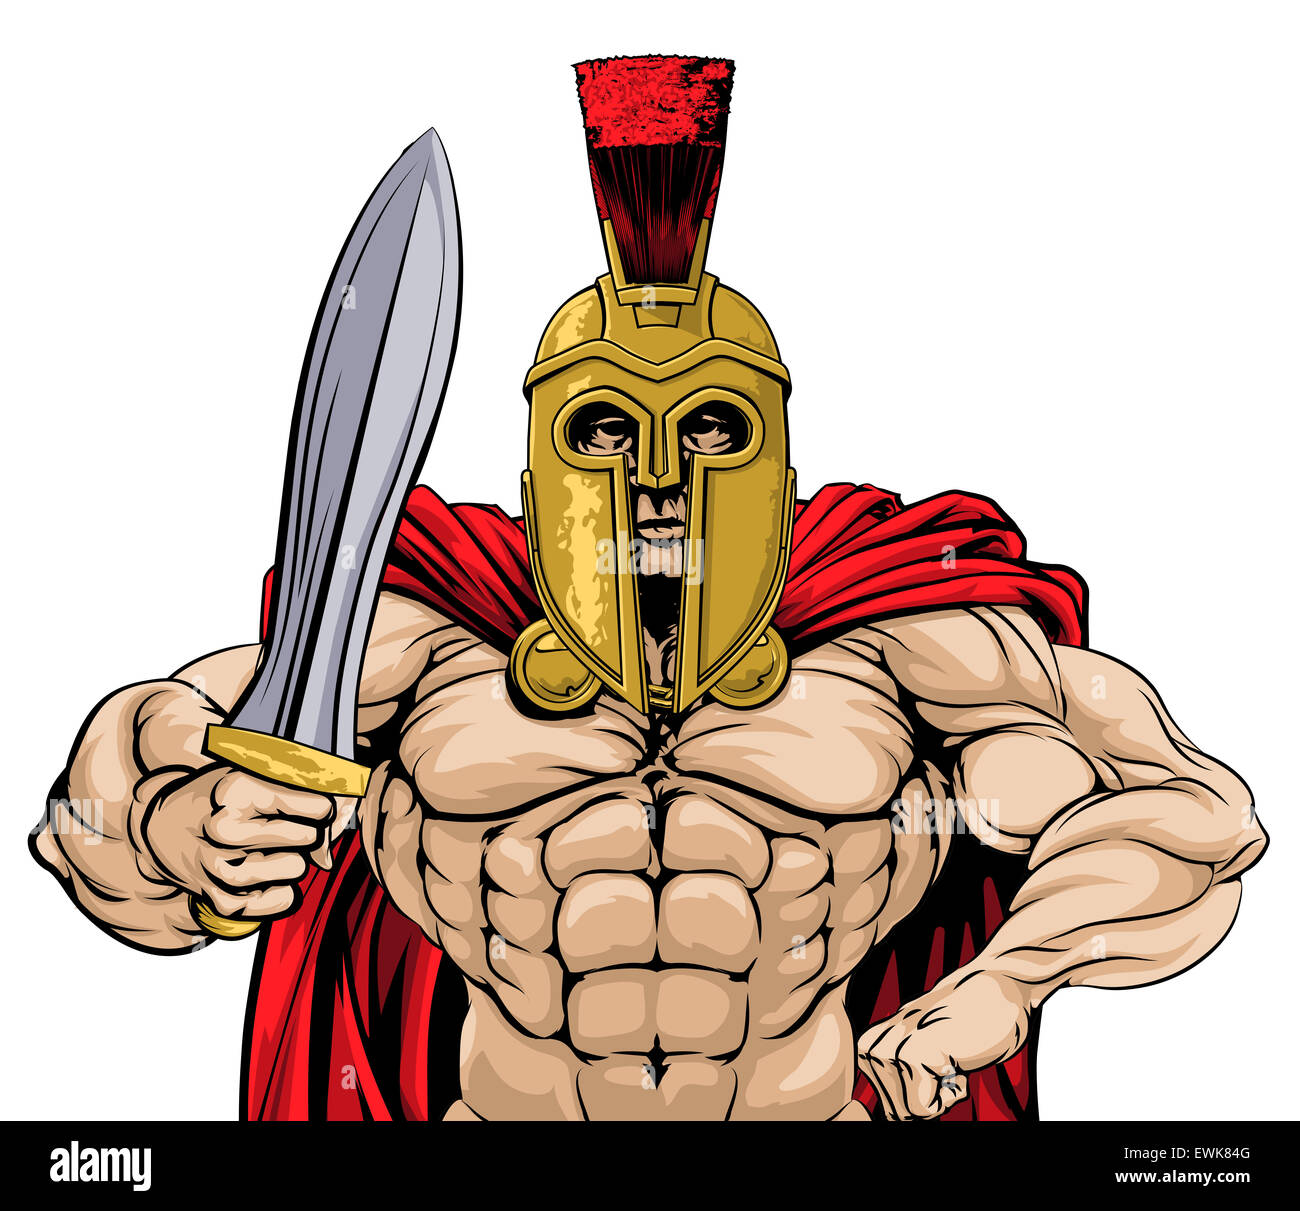 An illustration of a gladiator, ancient Greek, Trojan or Roman warrior or gladiator wearing a helmet and holding a sword Stock Photo